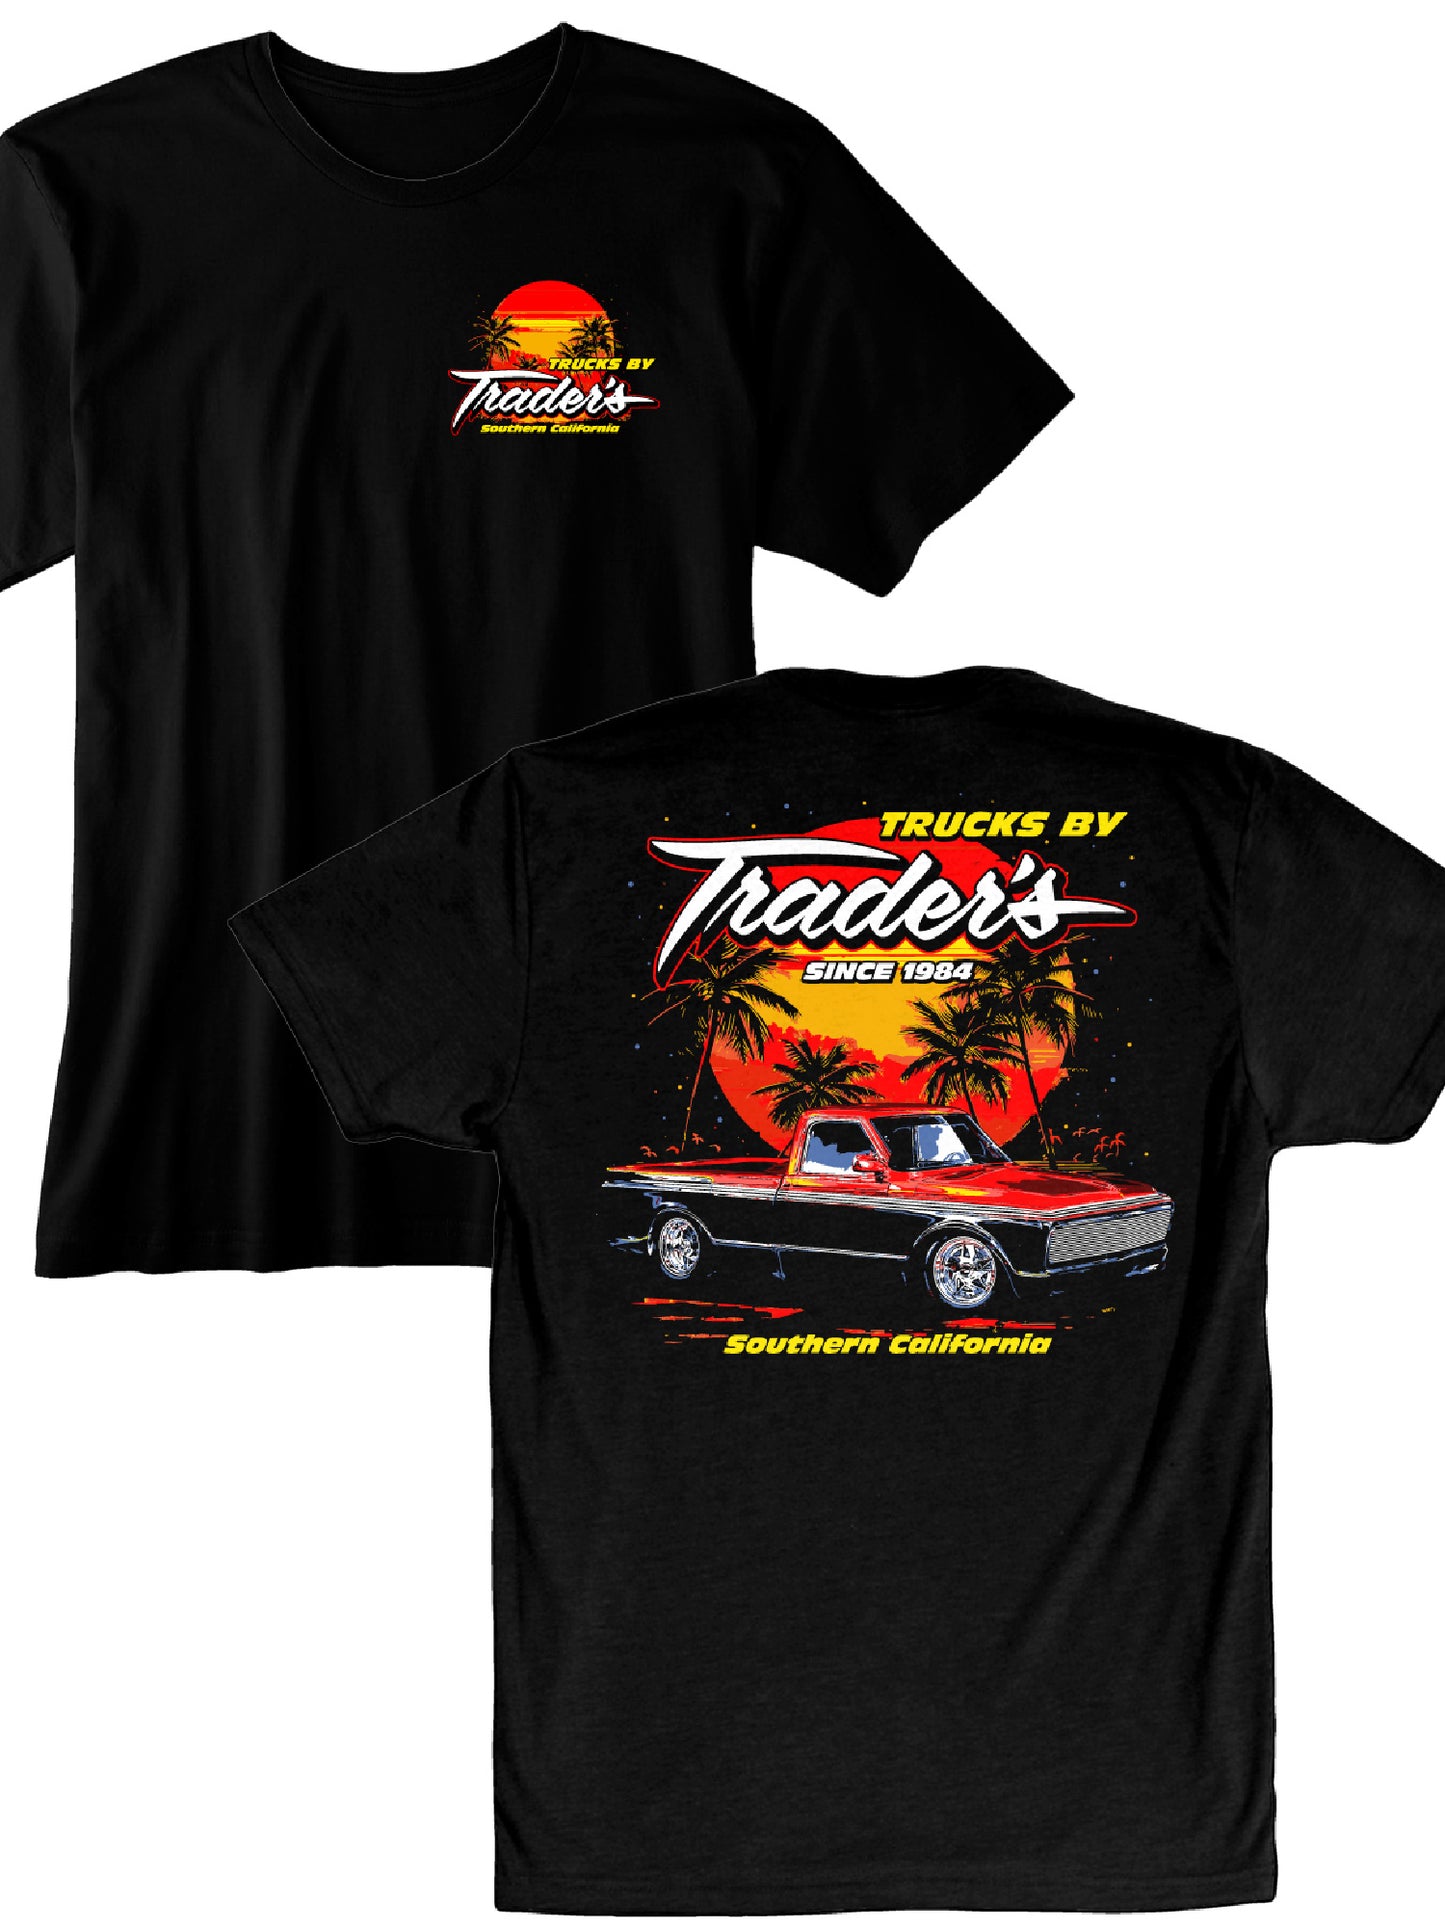 NEW! Limited Edition Tee - Trucks by Trader's Southern California Chevy Sunset